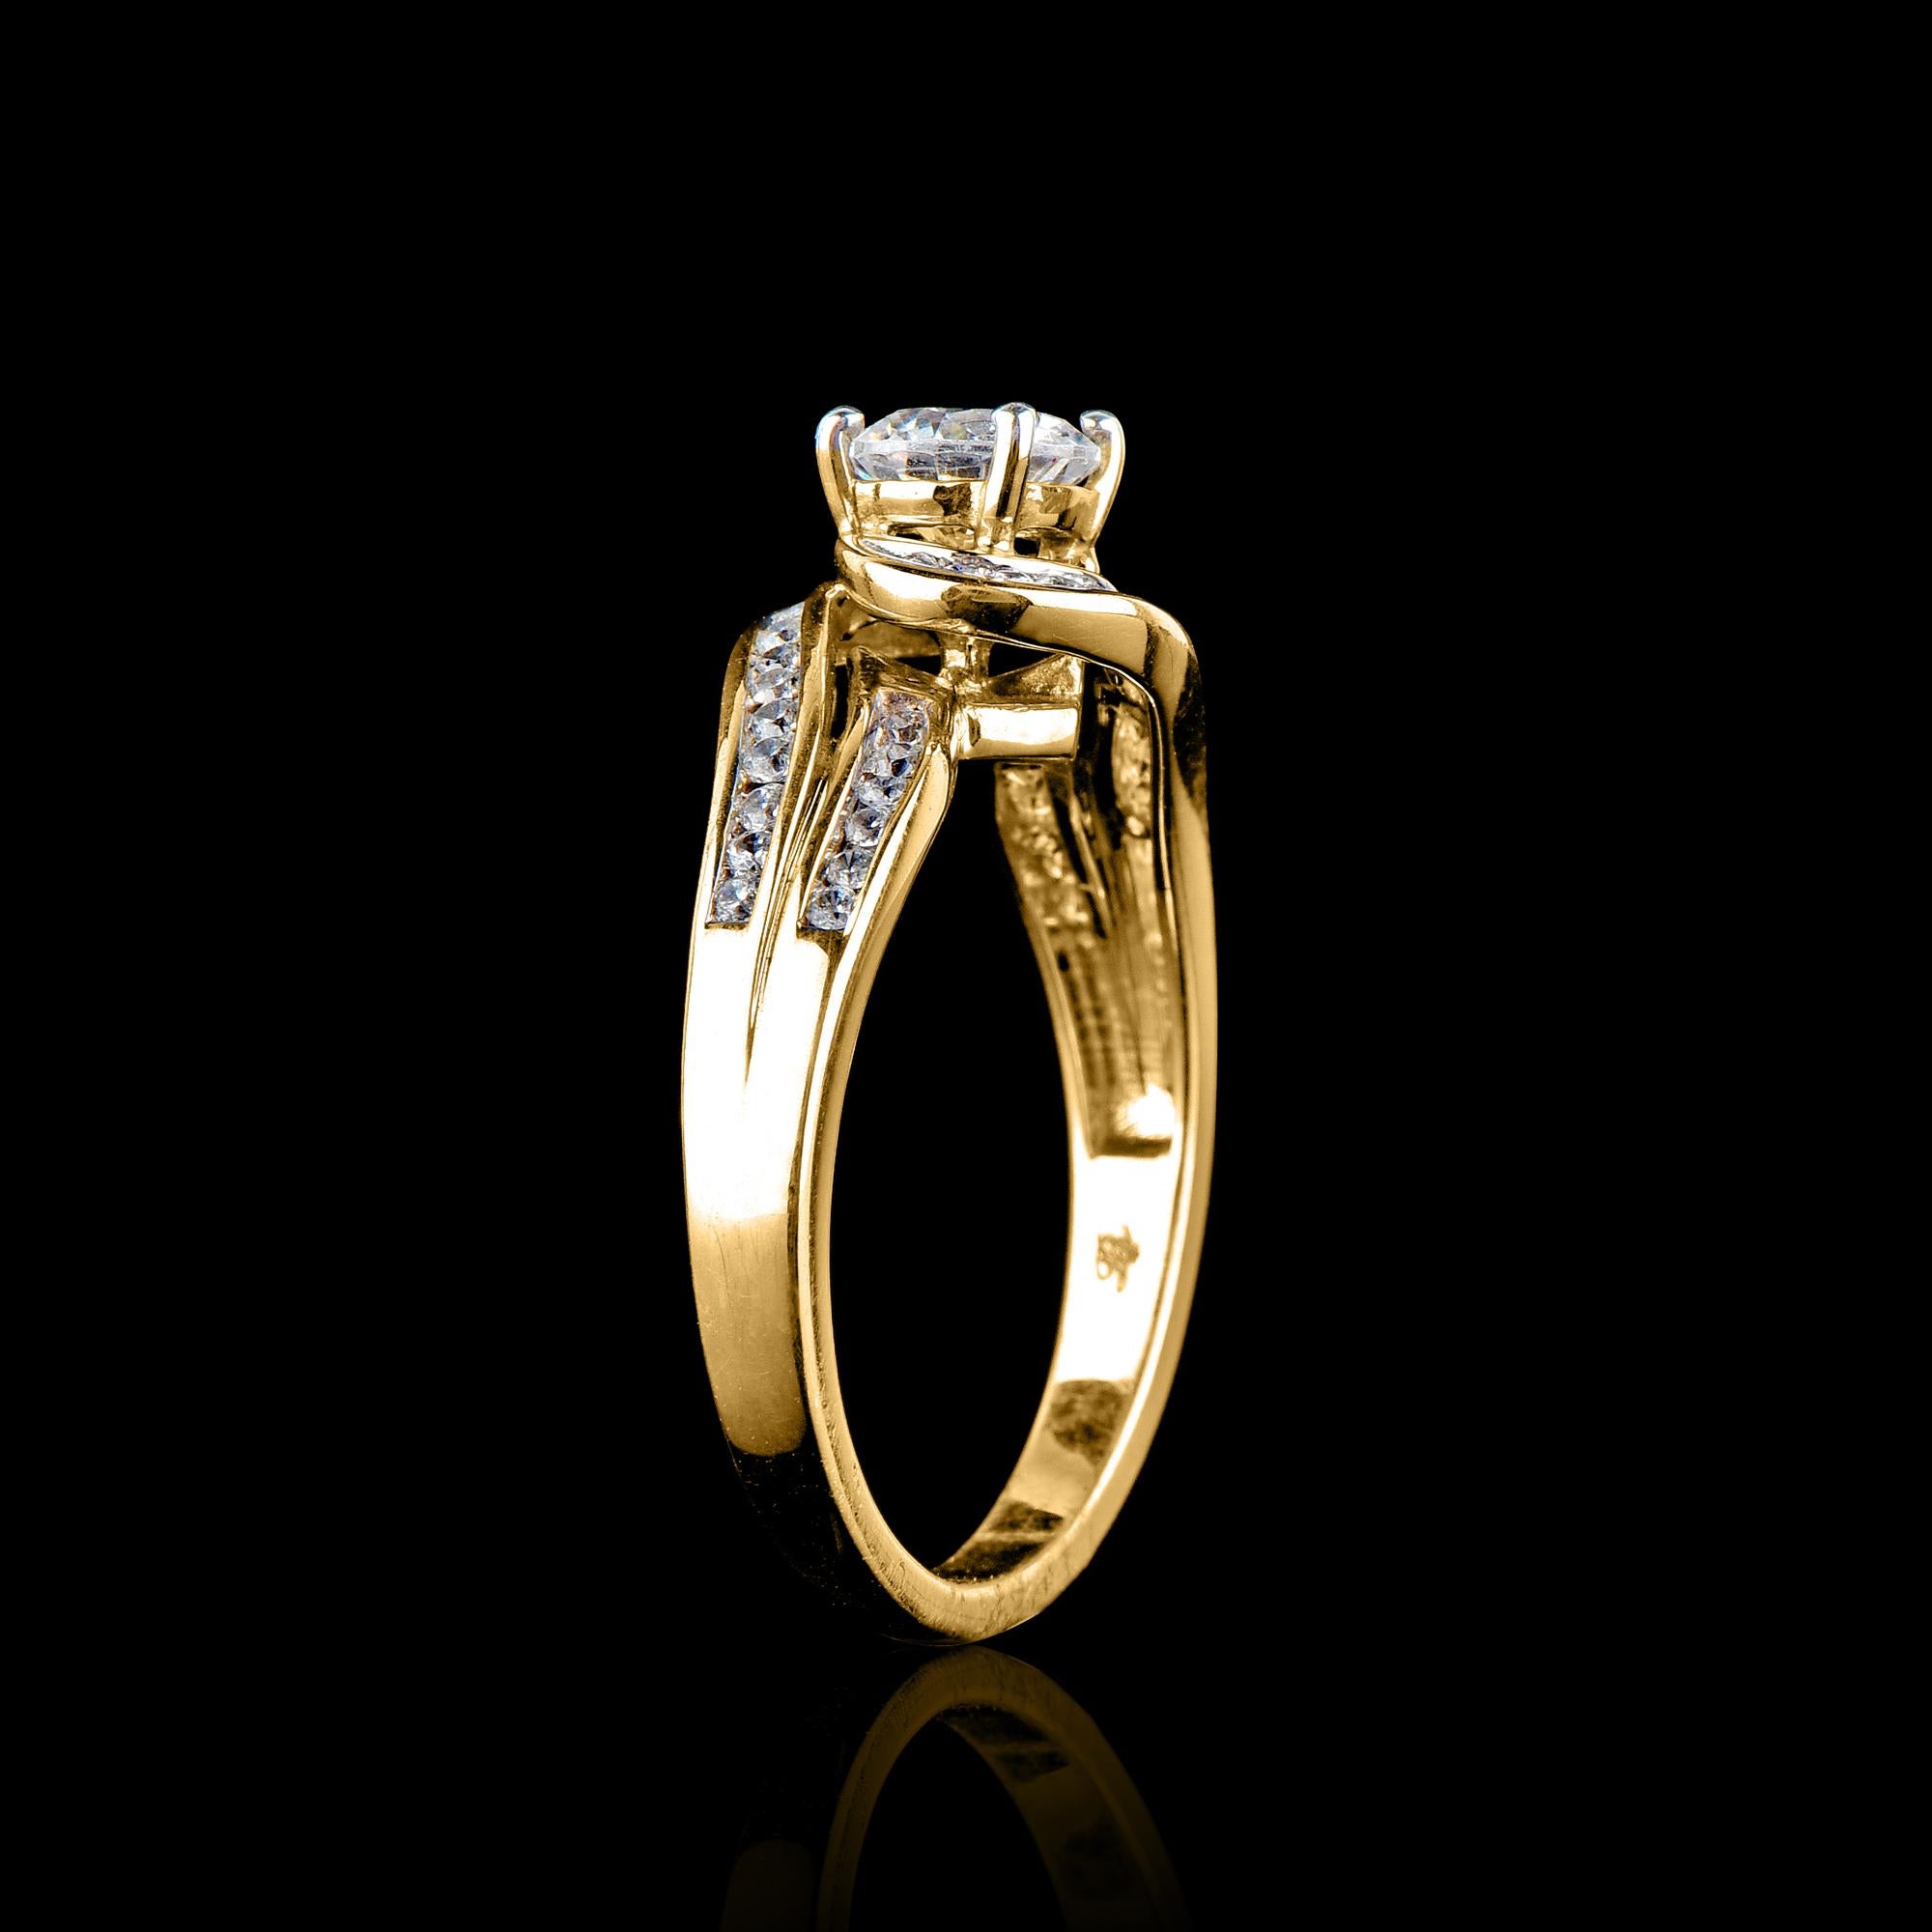 Truly exquisite, this entangled design 18 kt yellow gold diamond engagement band ring is sure to be admired for the inherent classic beauty and elegance within its design. This engagement band features 0.70 ct of centre stone and 0.30 ct of shank